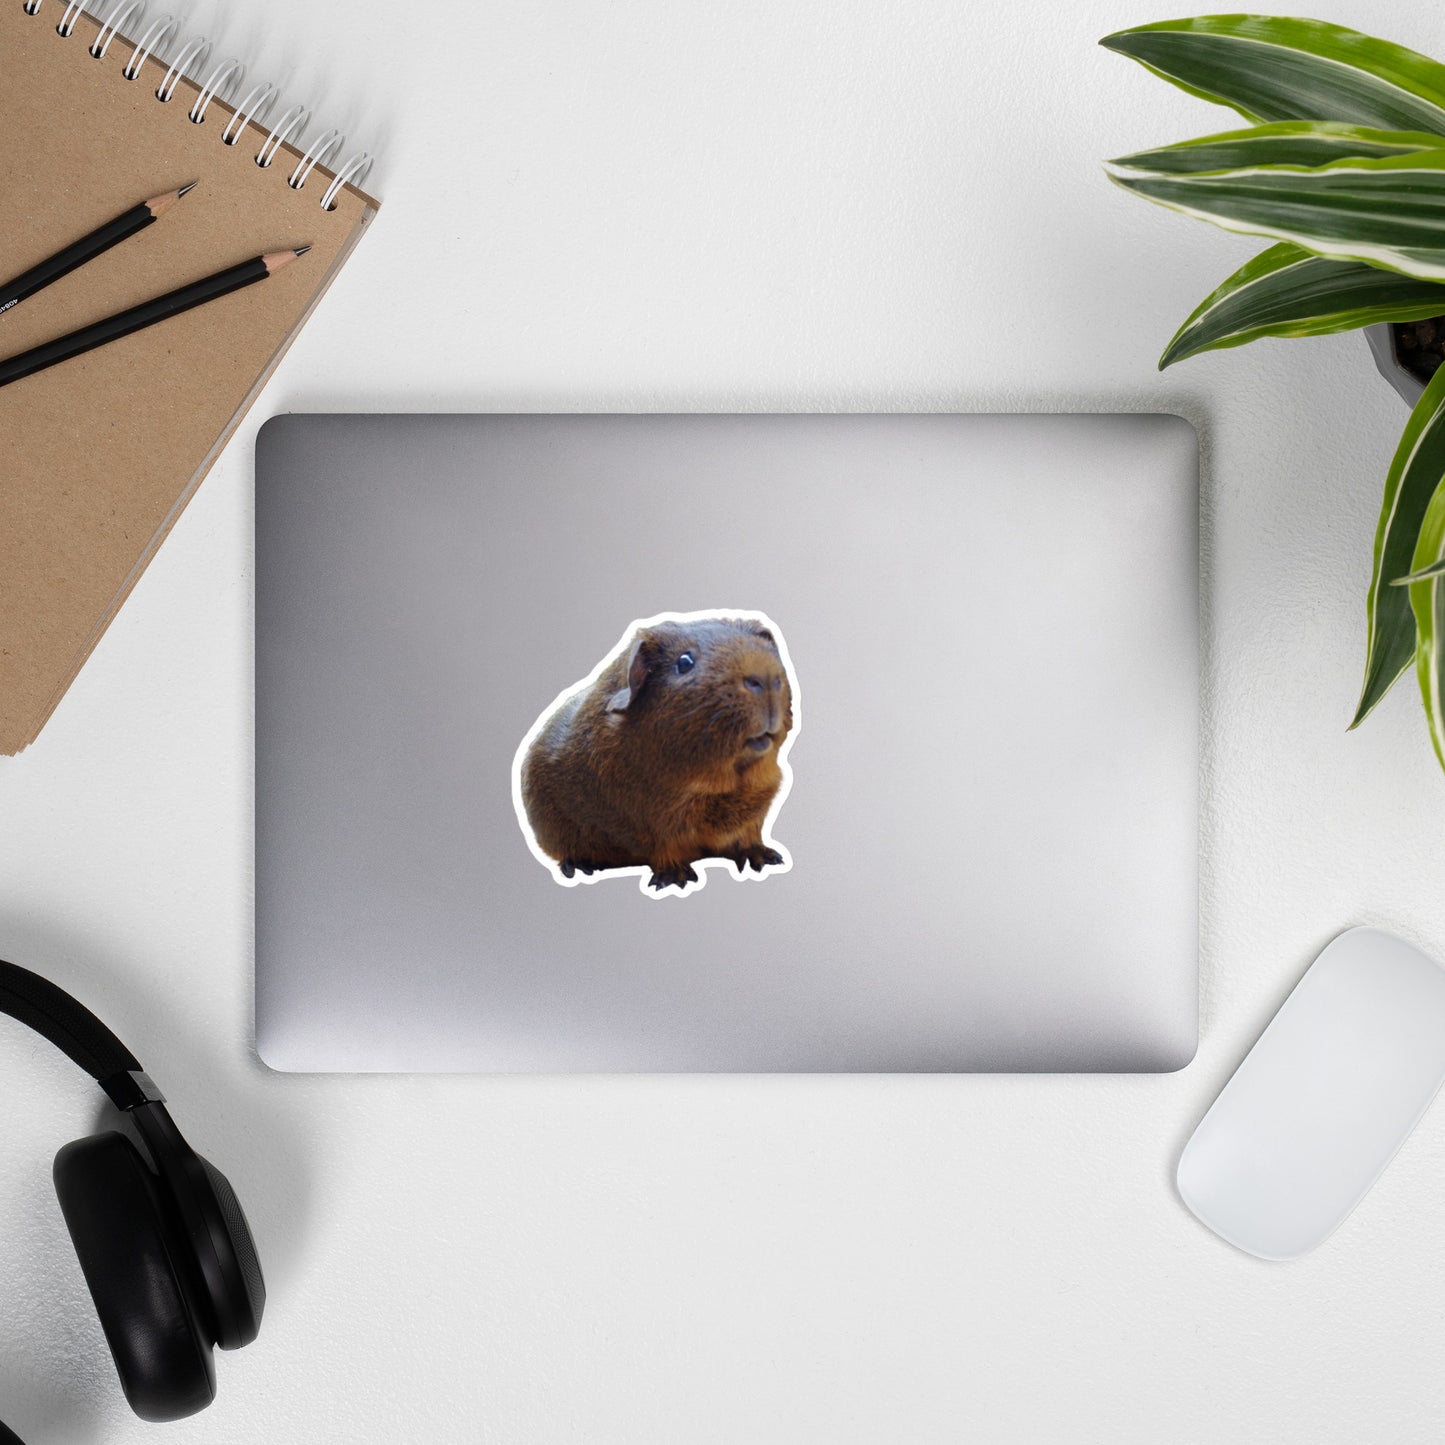 Gunther the Guinea Pig Bubble-free stickers